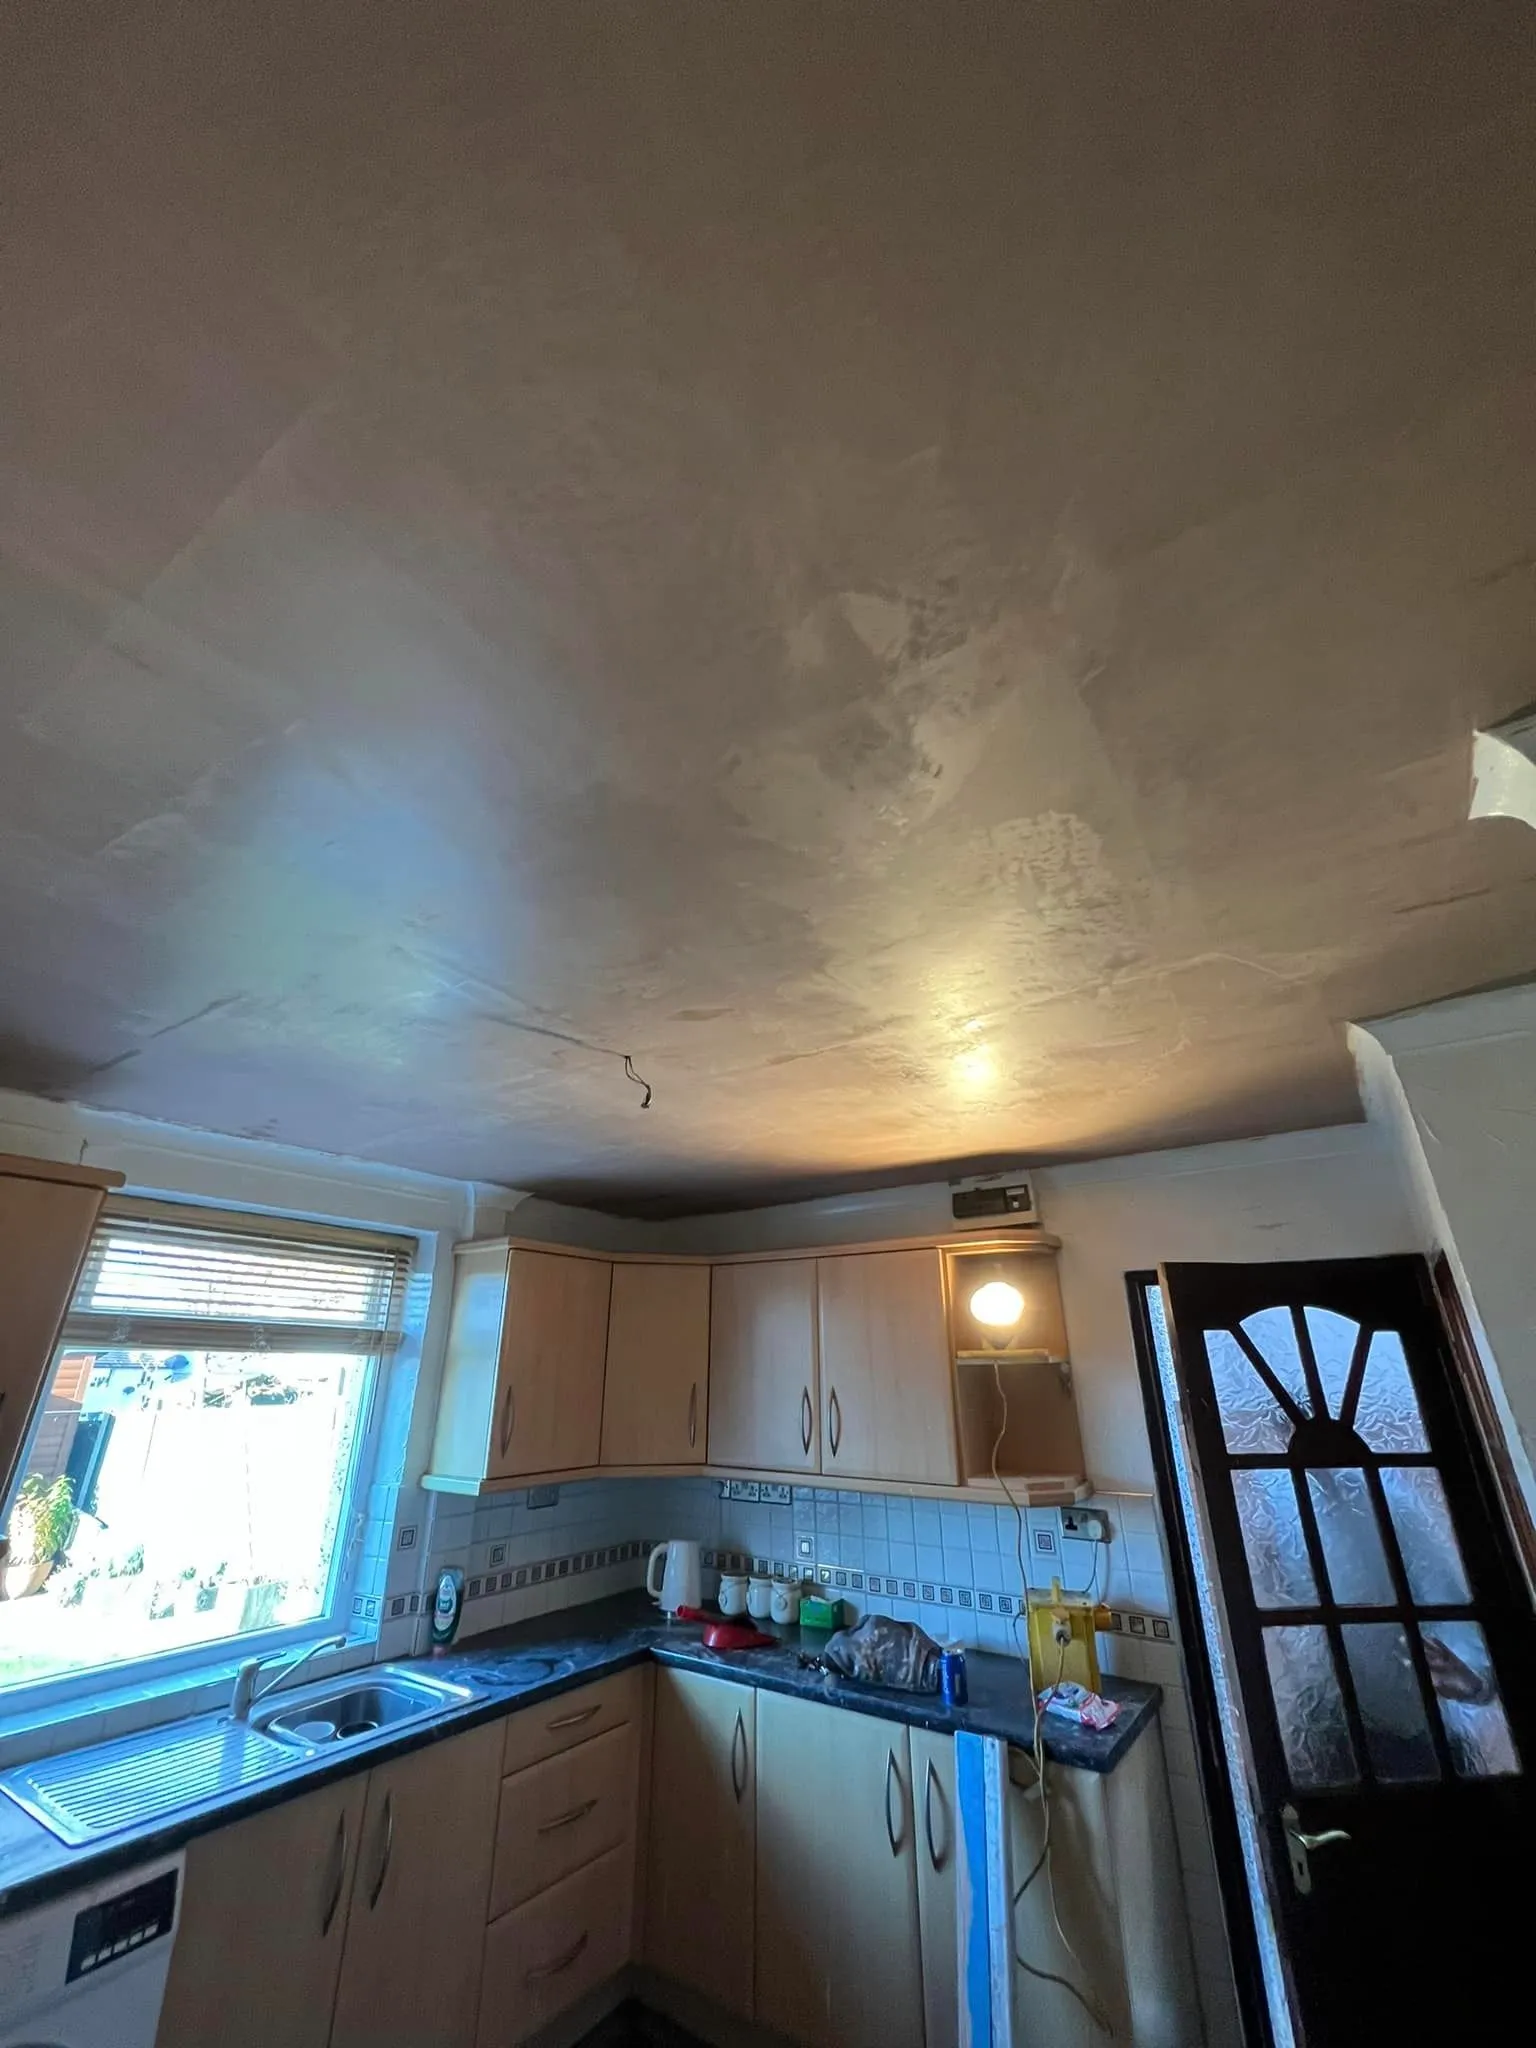 A kitchen that has a lot of white paint on the ceiling.